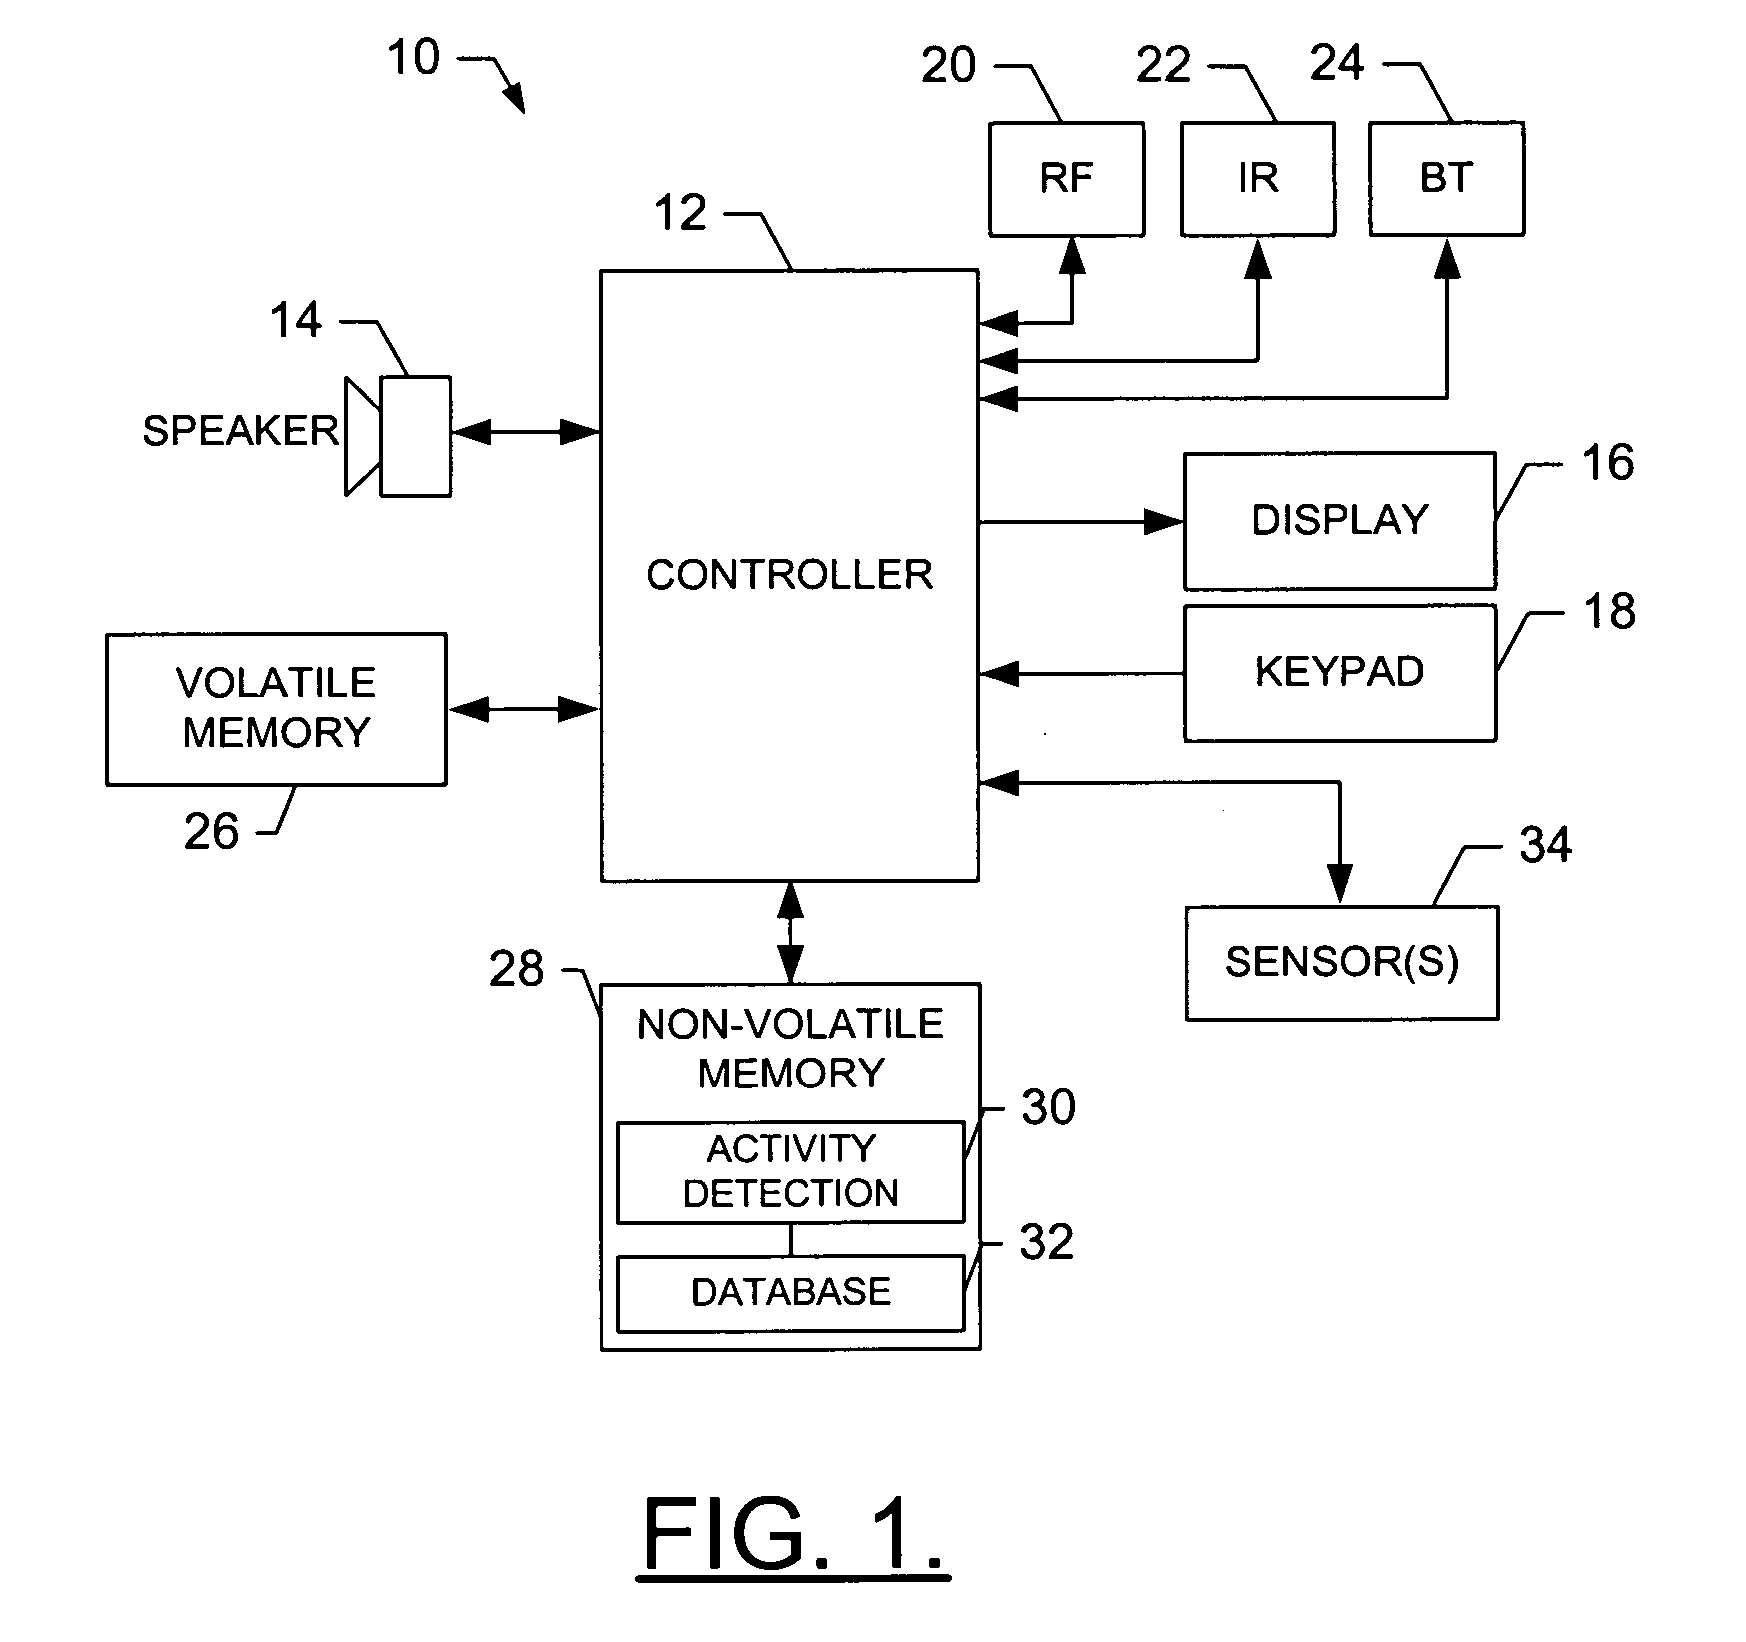 System, method and computer program product for managing physiological information relating to a terminal user